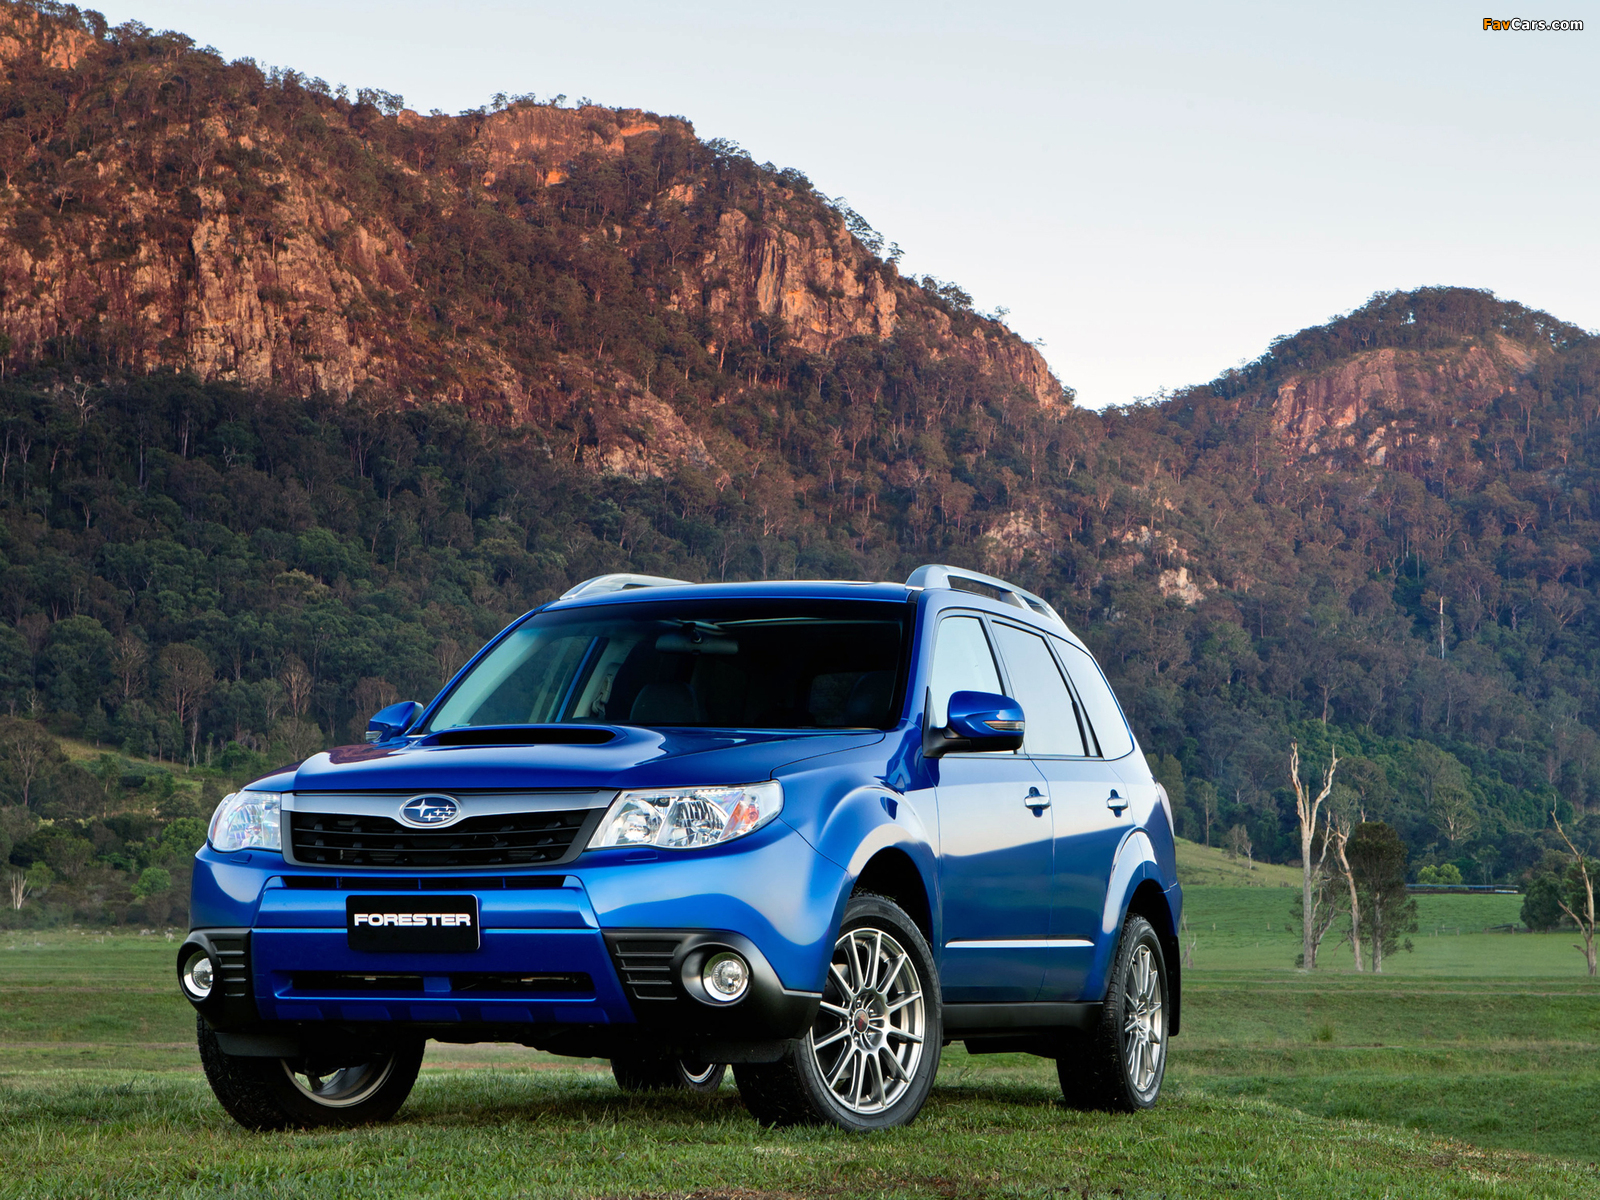 Subaru Forester S Edition 2010 pictures 1600x1200 